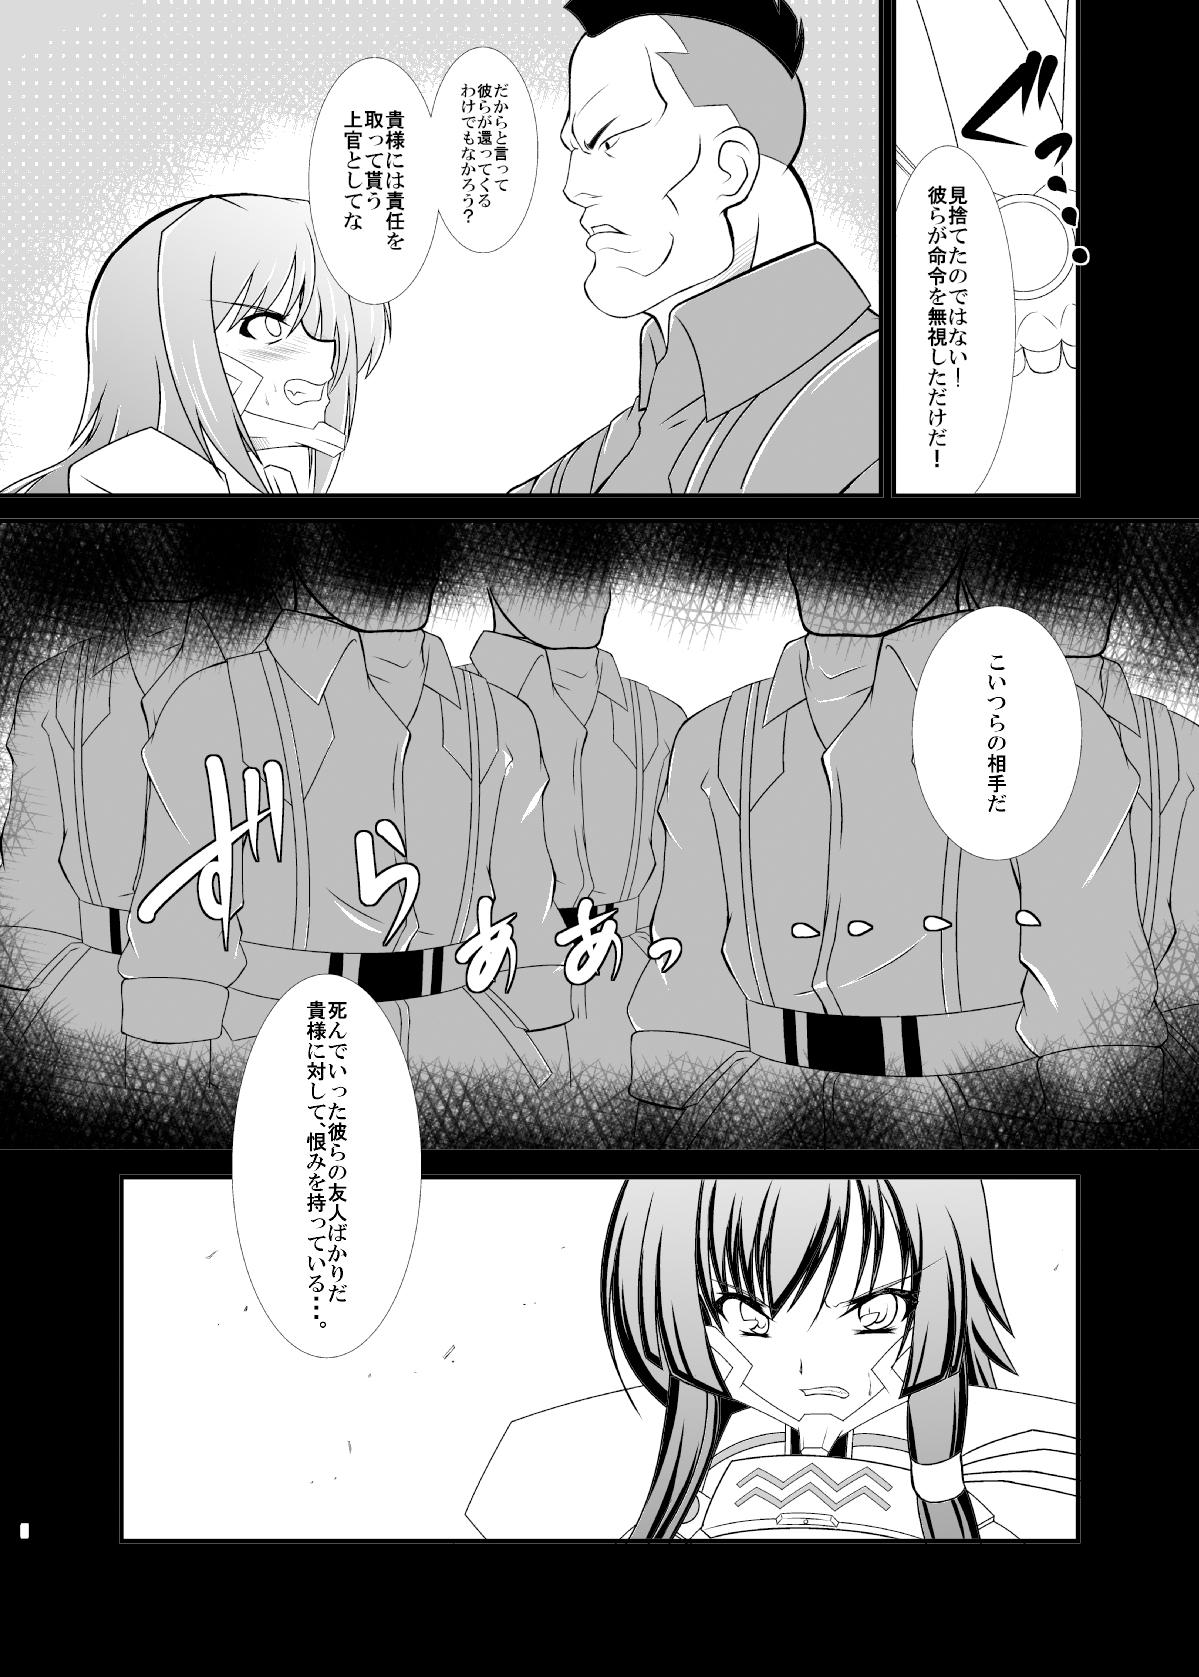 Breasts KDT - Muv-luv alternative total eclipse Rimming - Page 6